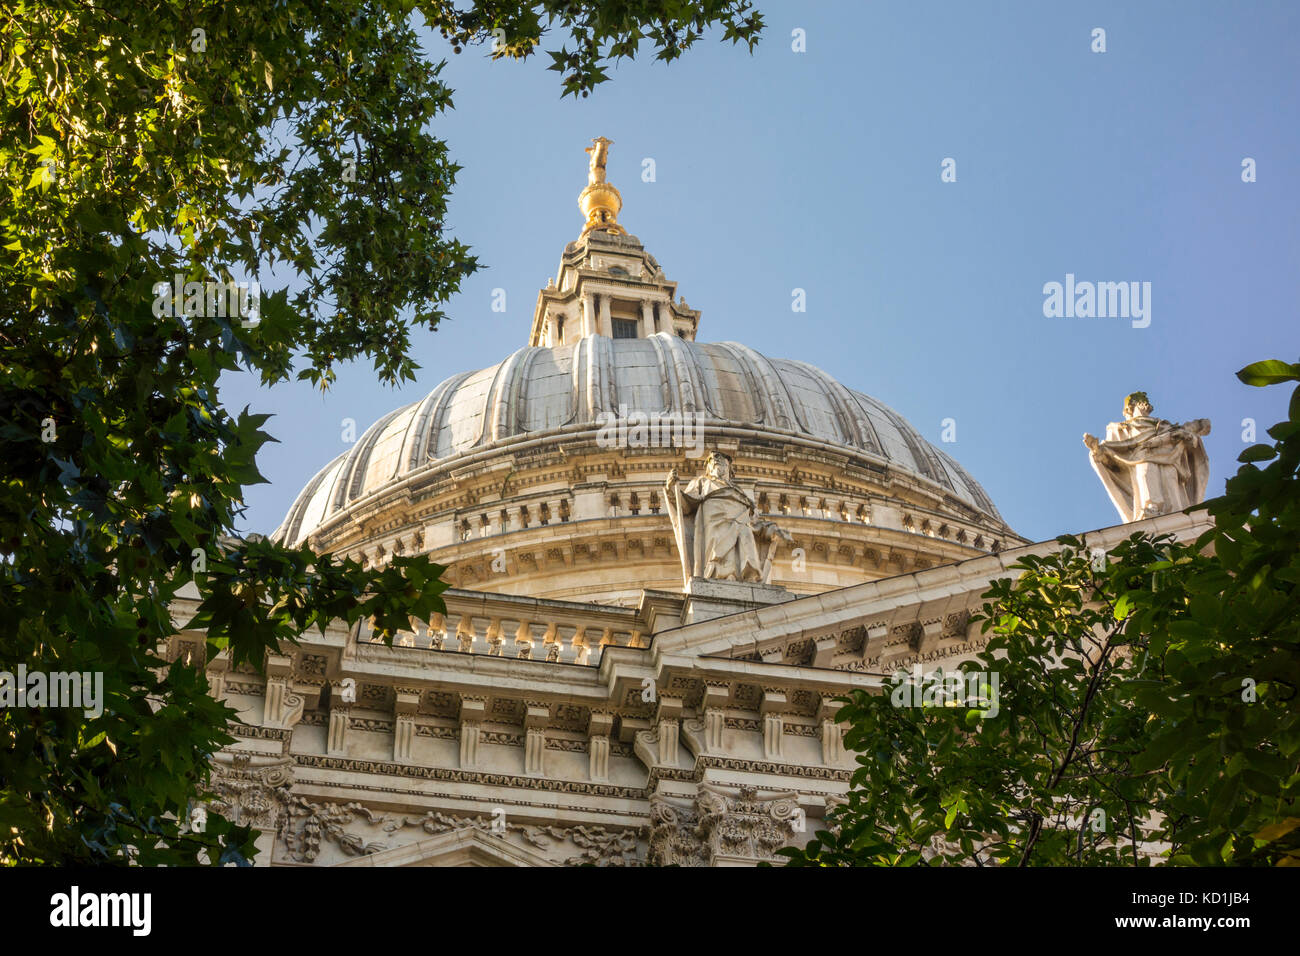 St. Paul's Cathedral dome viewed through trees and leaves in the churchyard garden. City of London, UK Stock Photo